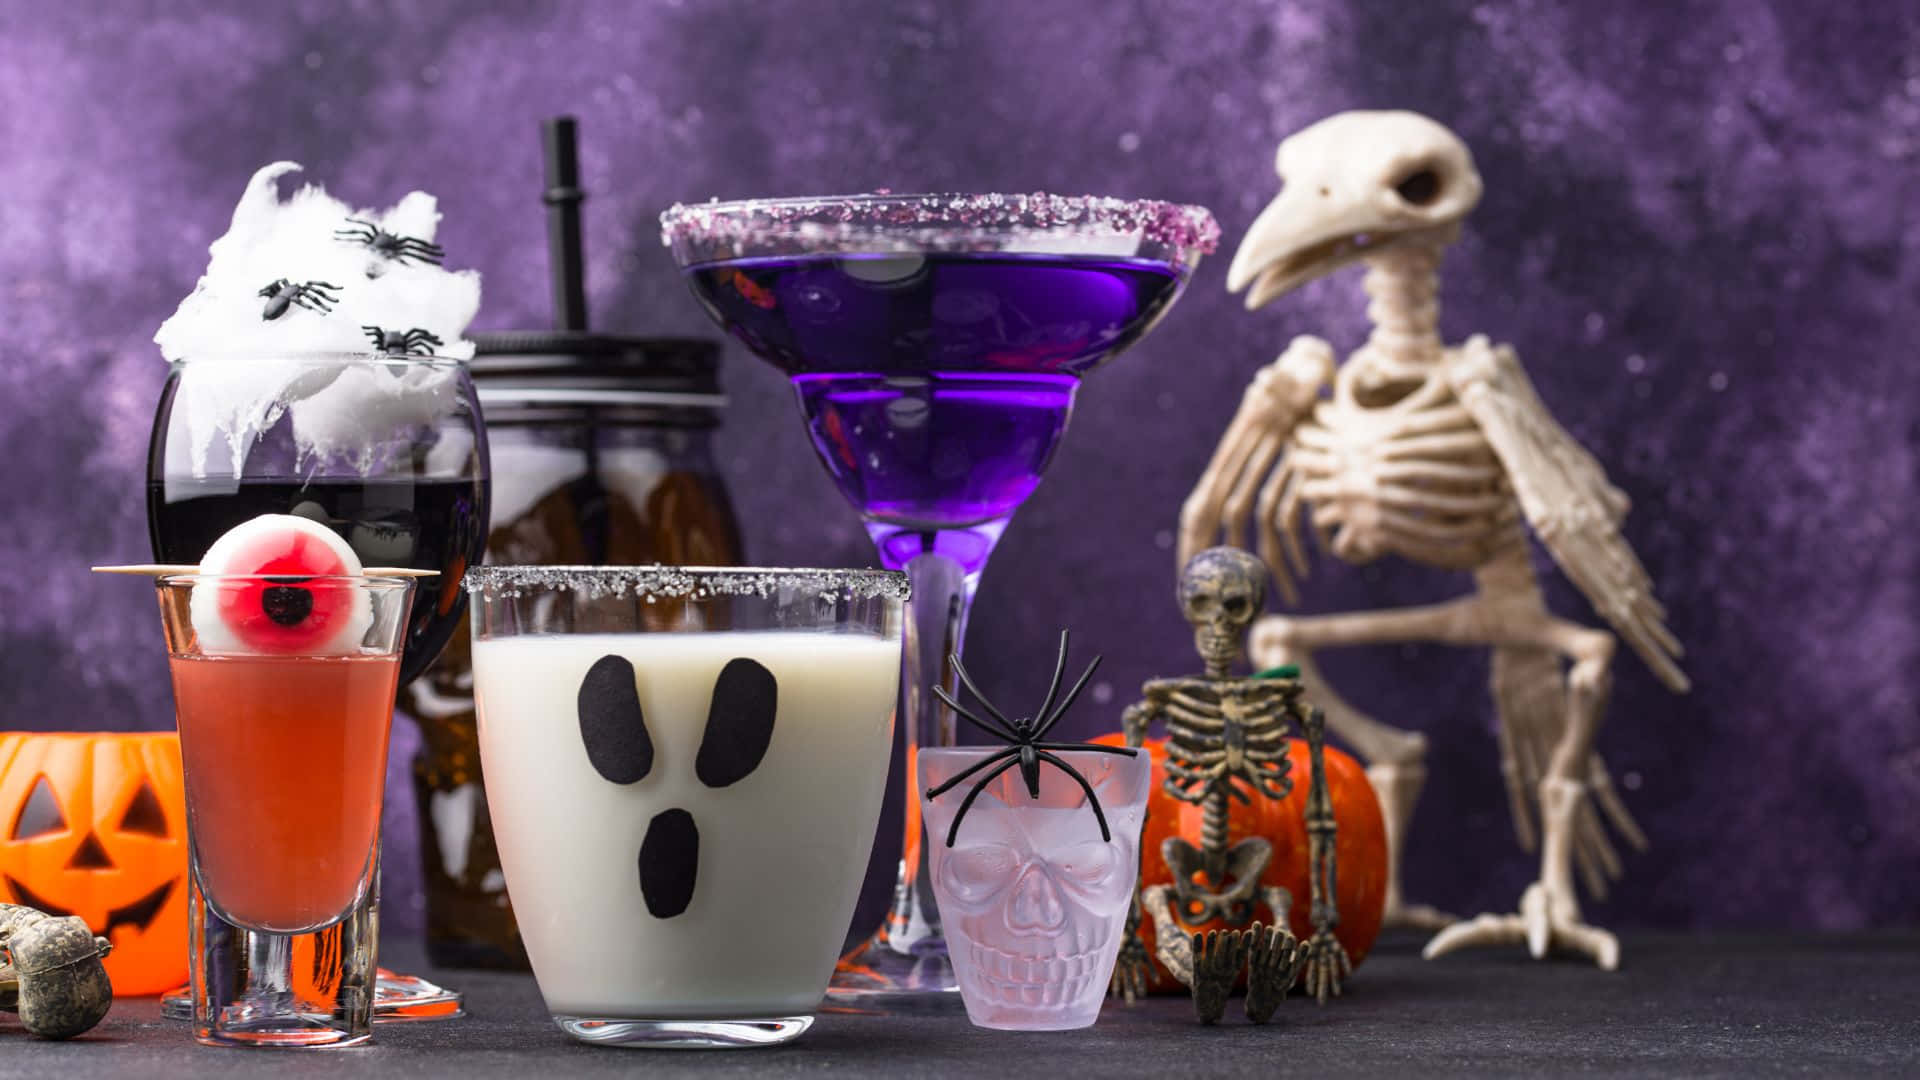 "Make Halloween Special With A Spooky Cocktail!" Wallpaper